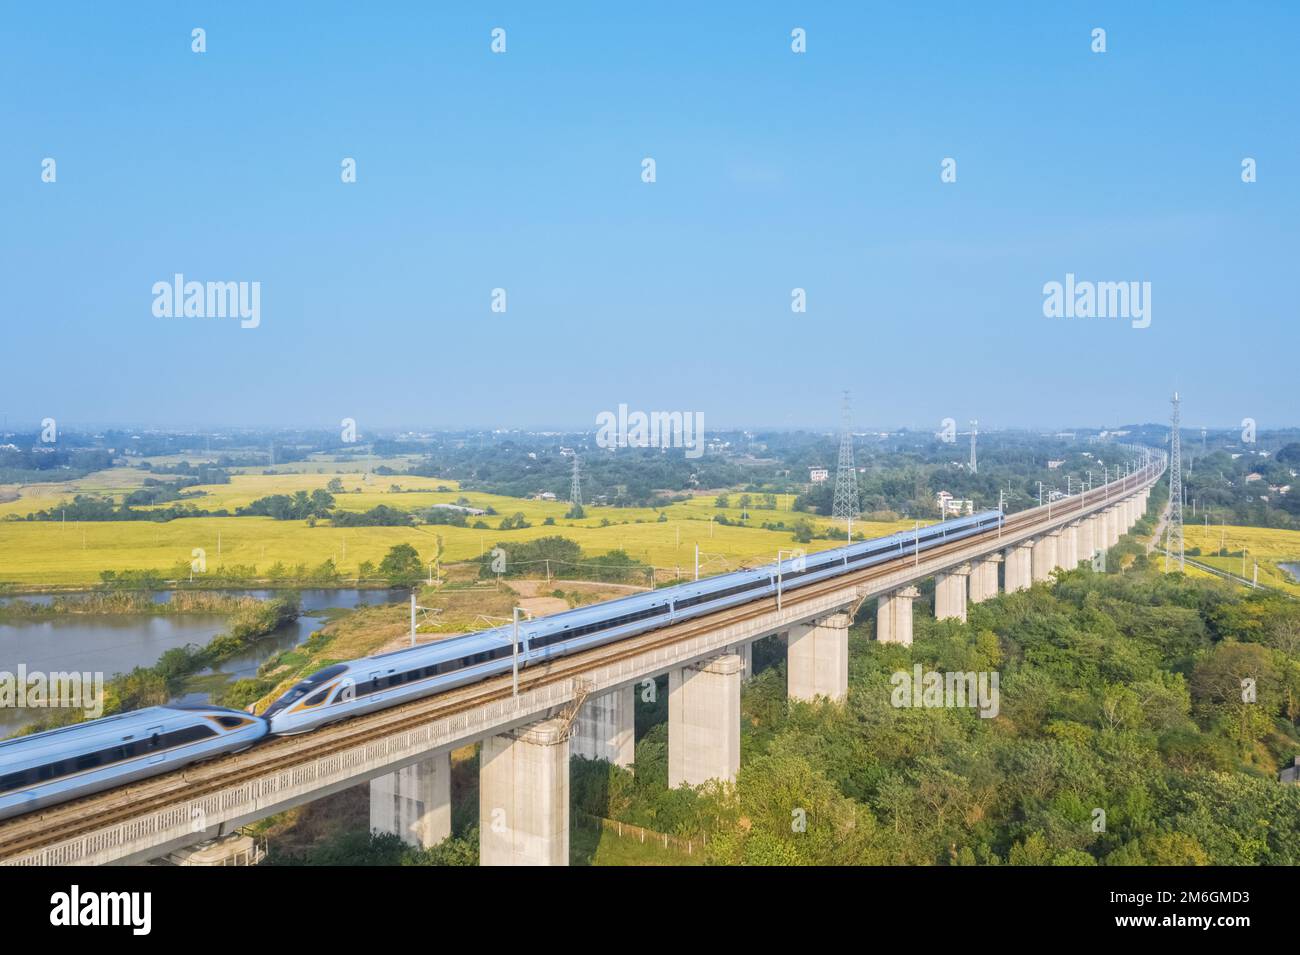 Aerial view of high speed trains in rural autumn landscape Stock Photo